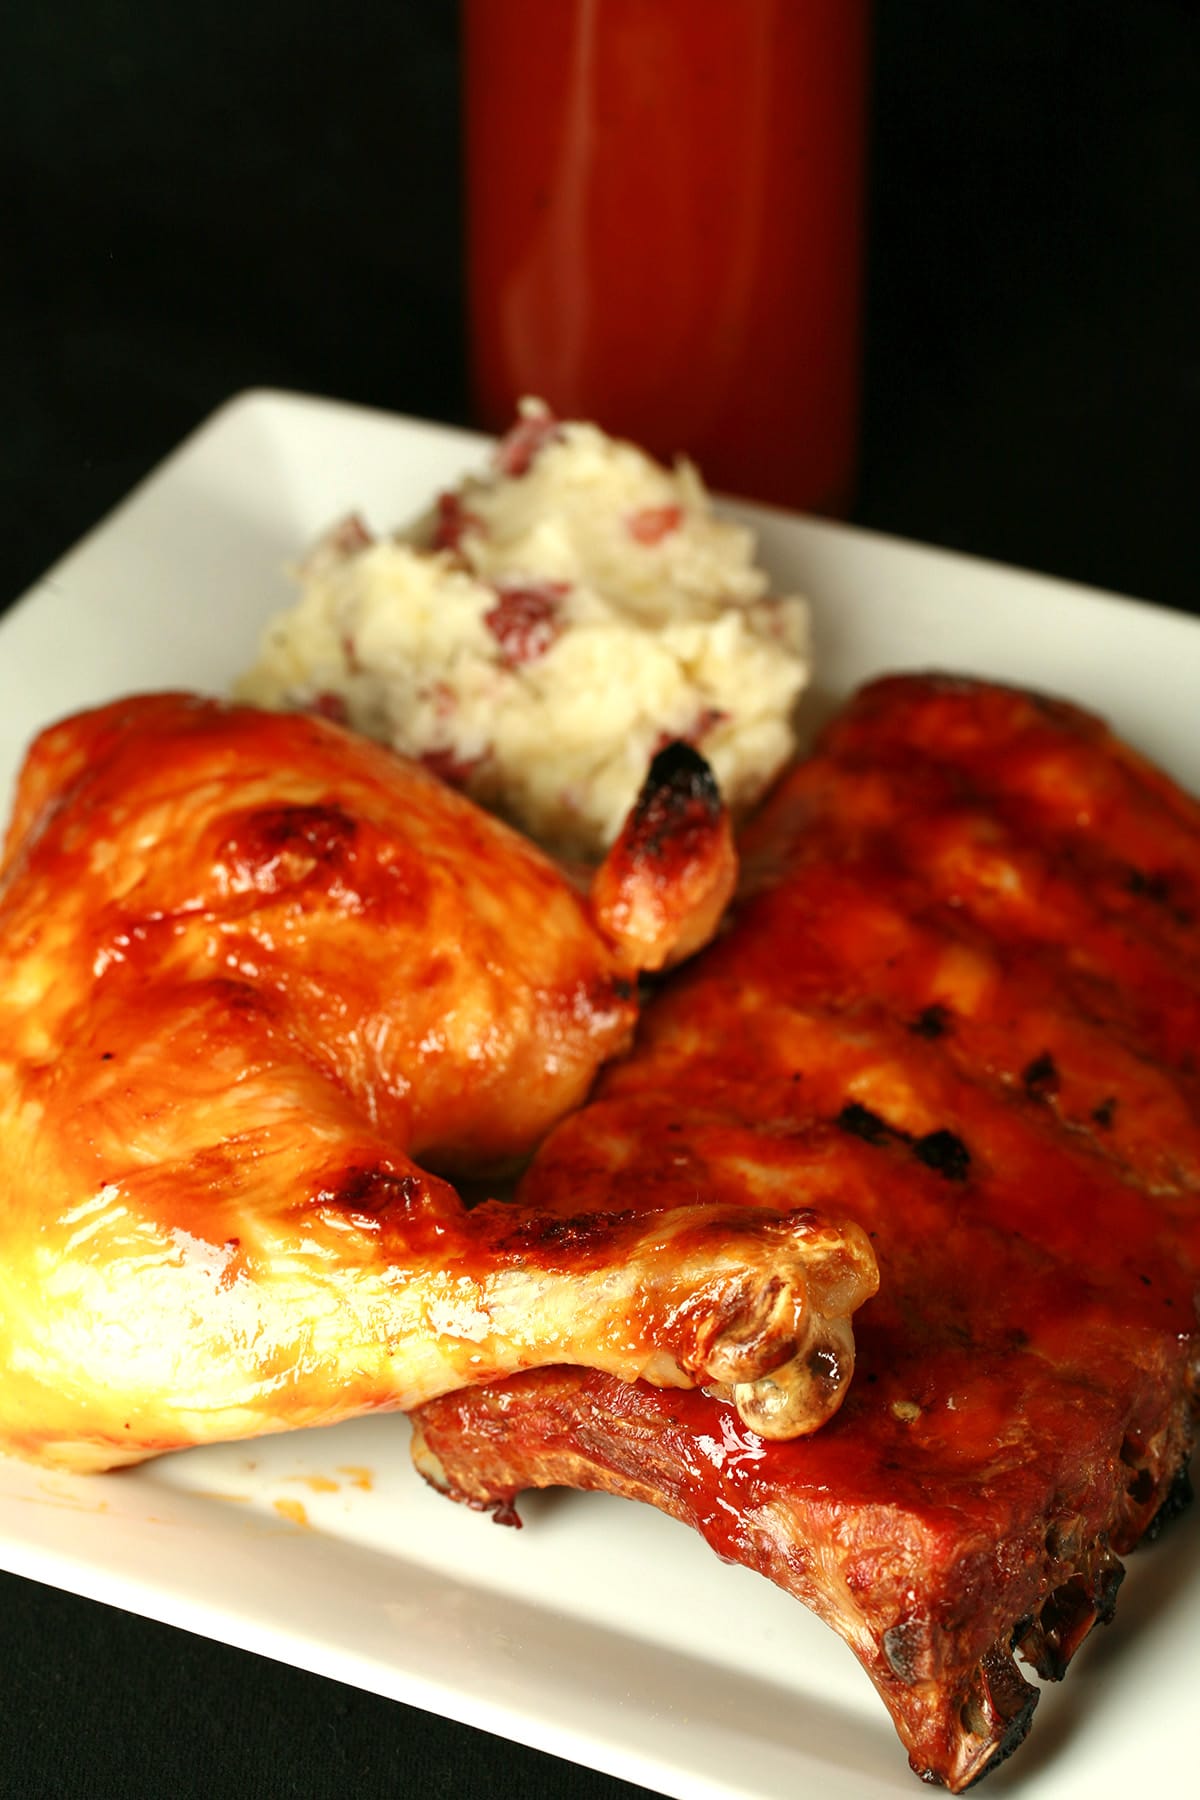 A plate of BBQ chicken, ribs, and mashed potatoes. The meats are coated in replica Diana Rib & Chicken Sauce. A bottle of the sauce rests behind the plate of food.